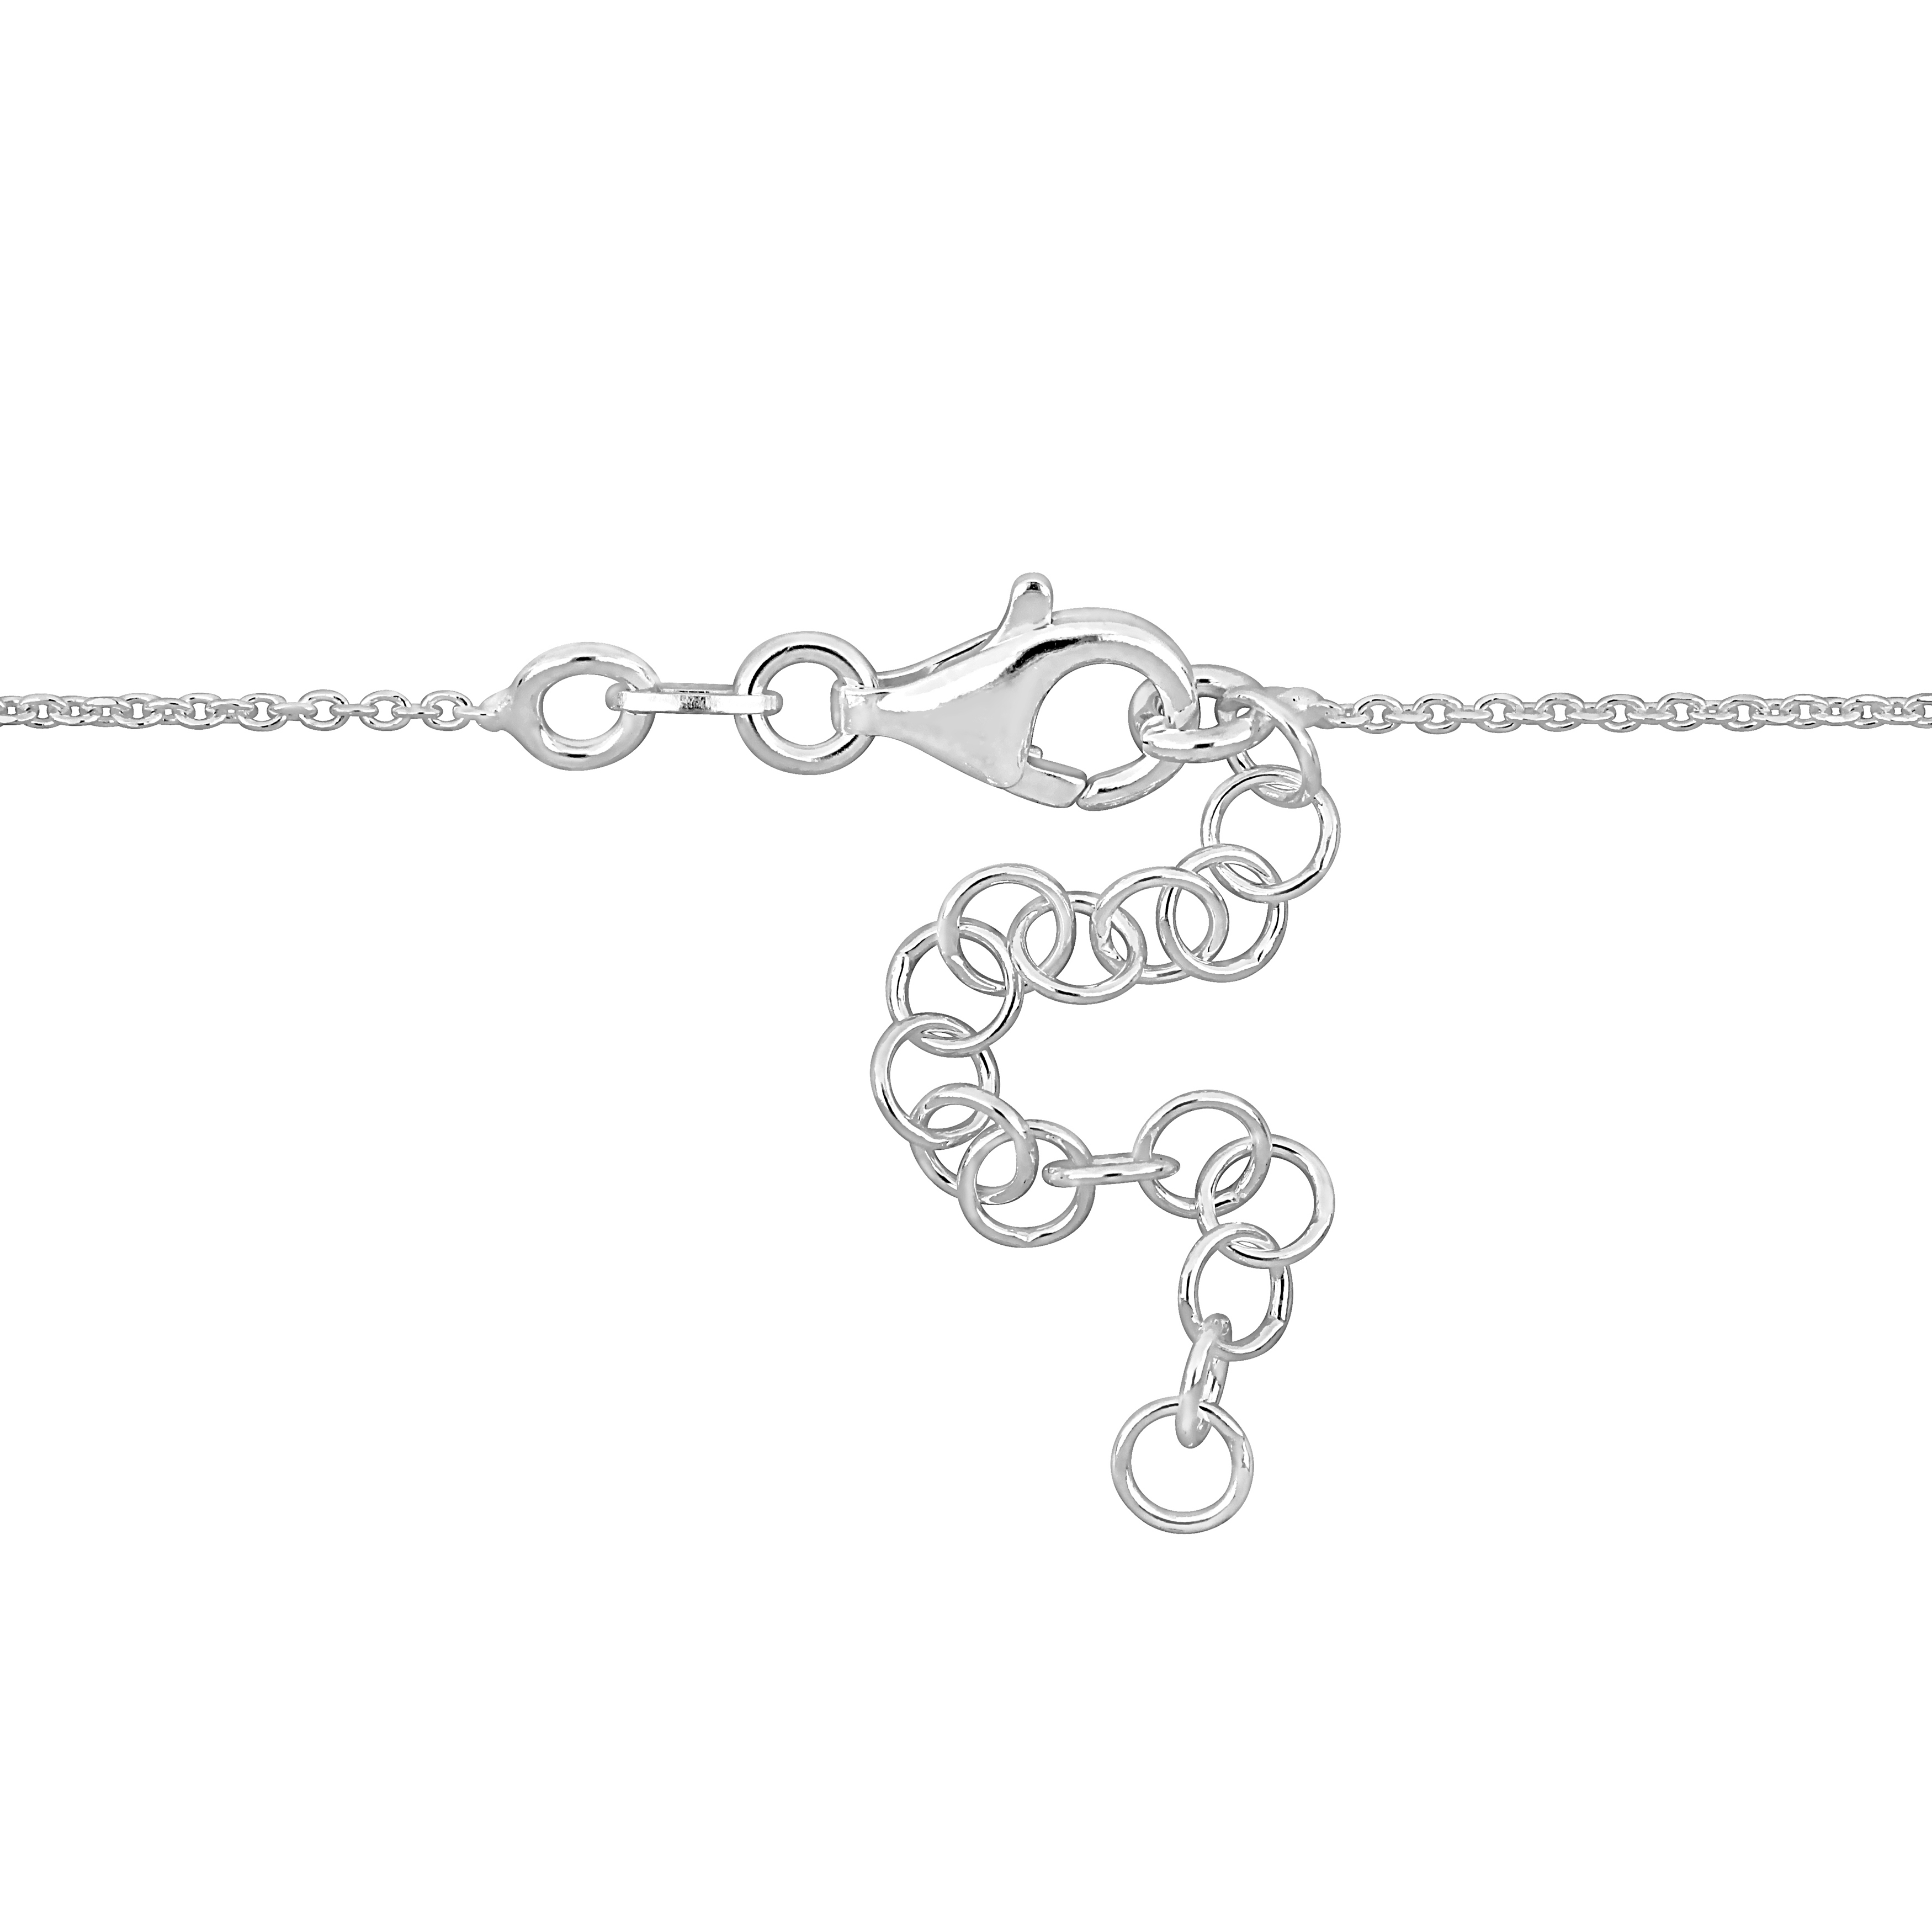 Yellow Heart Necklace on Diamond Cut Cable Chain in Sterling Silver - 16.5+1 in.